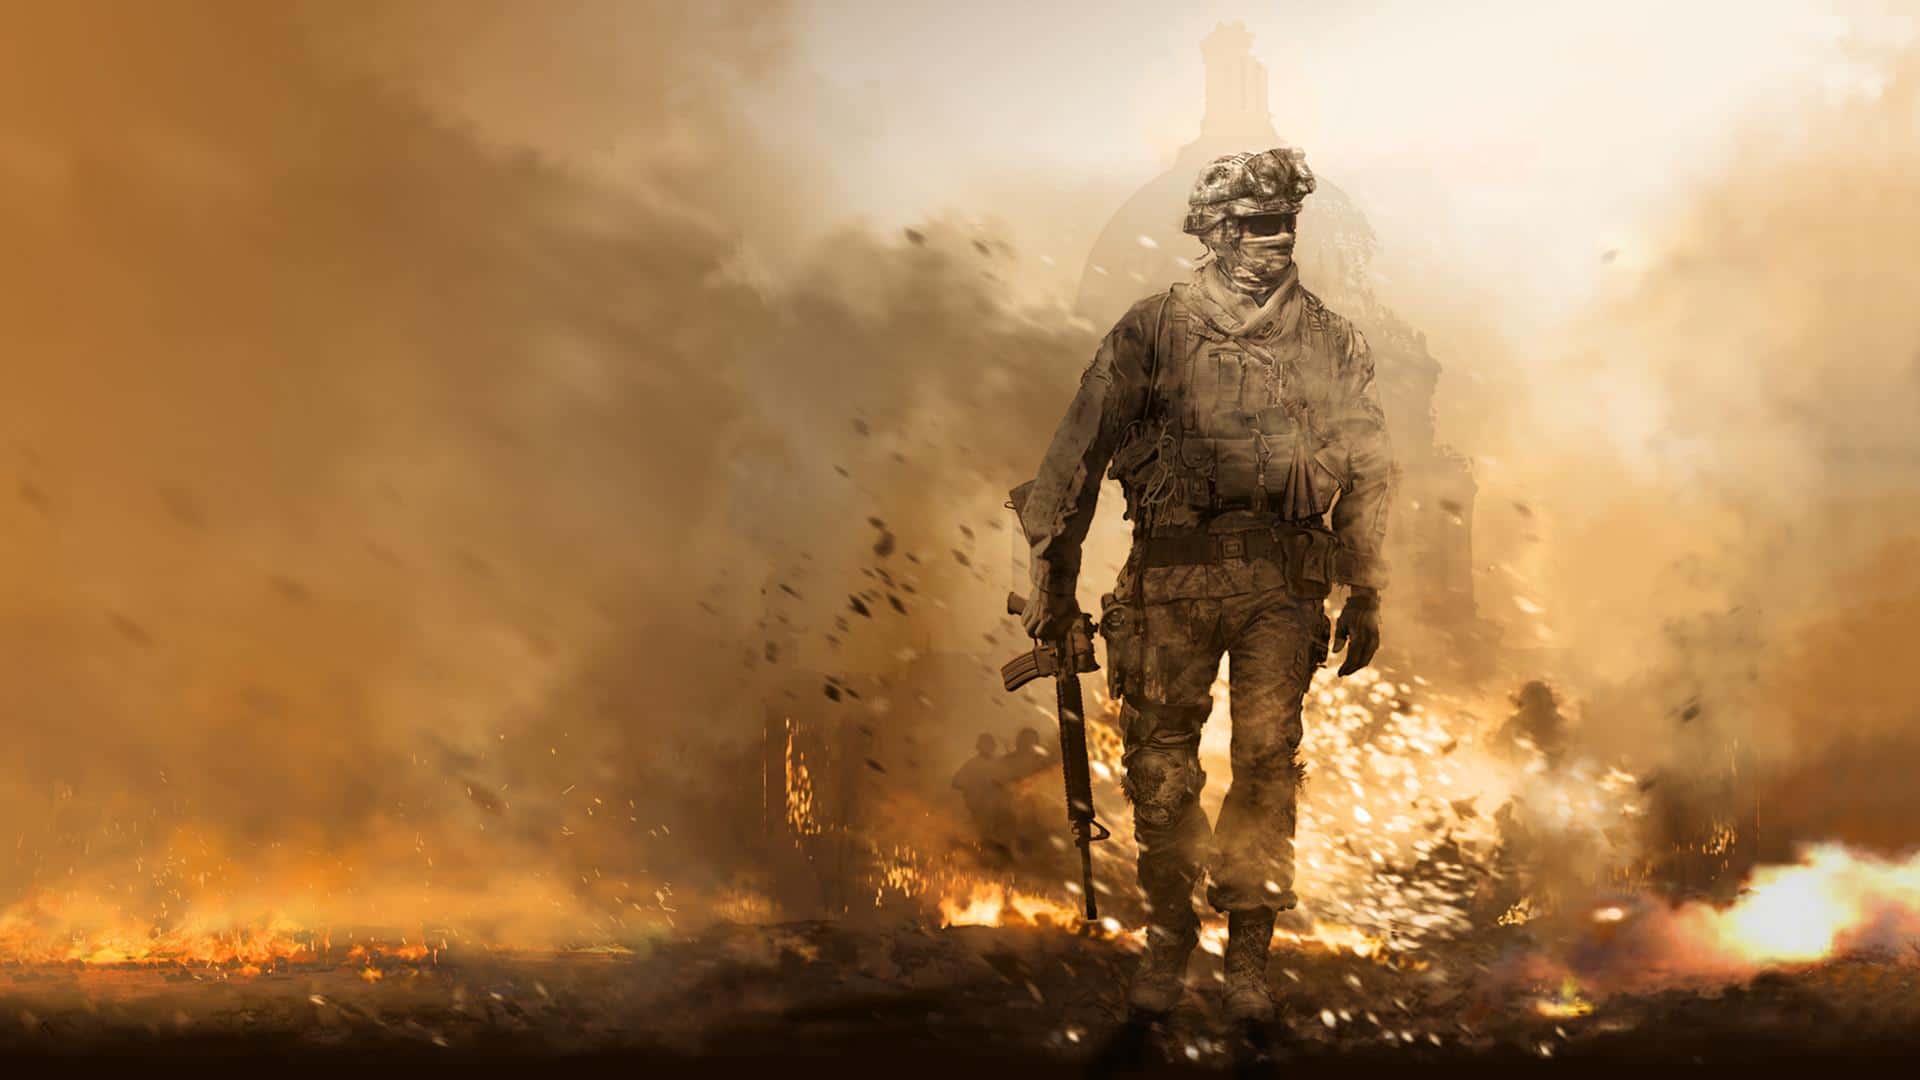 Fall Guys: Ultimate Knockout and Modern Warfare 2 are August's PS Plus  games